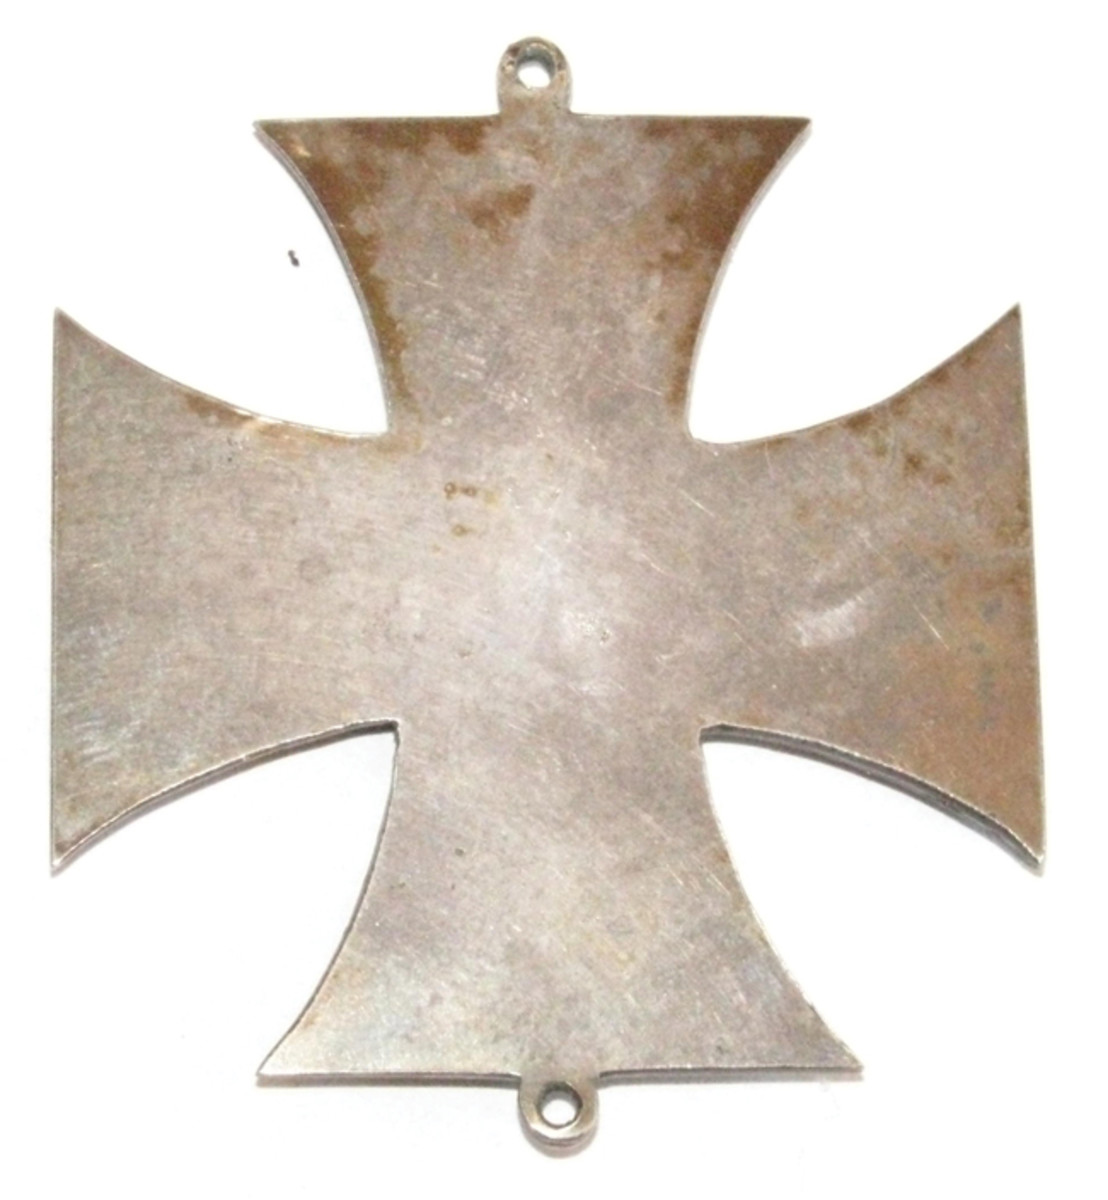  This First Class 1813 Iron Cross may have been manufactured after 1838, when the more decorative center was authorized to be worn facing out.